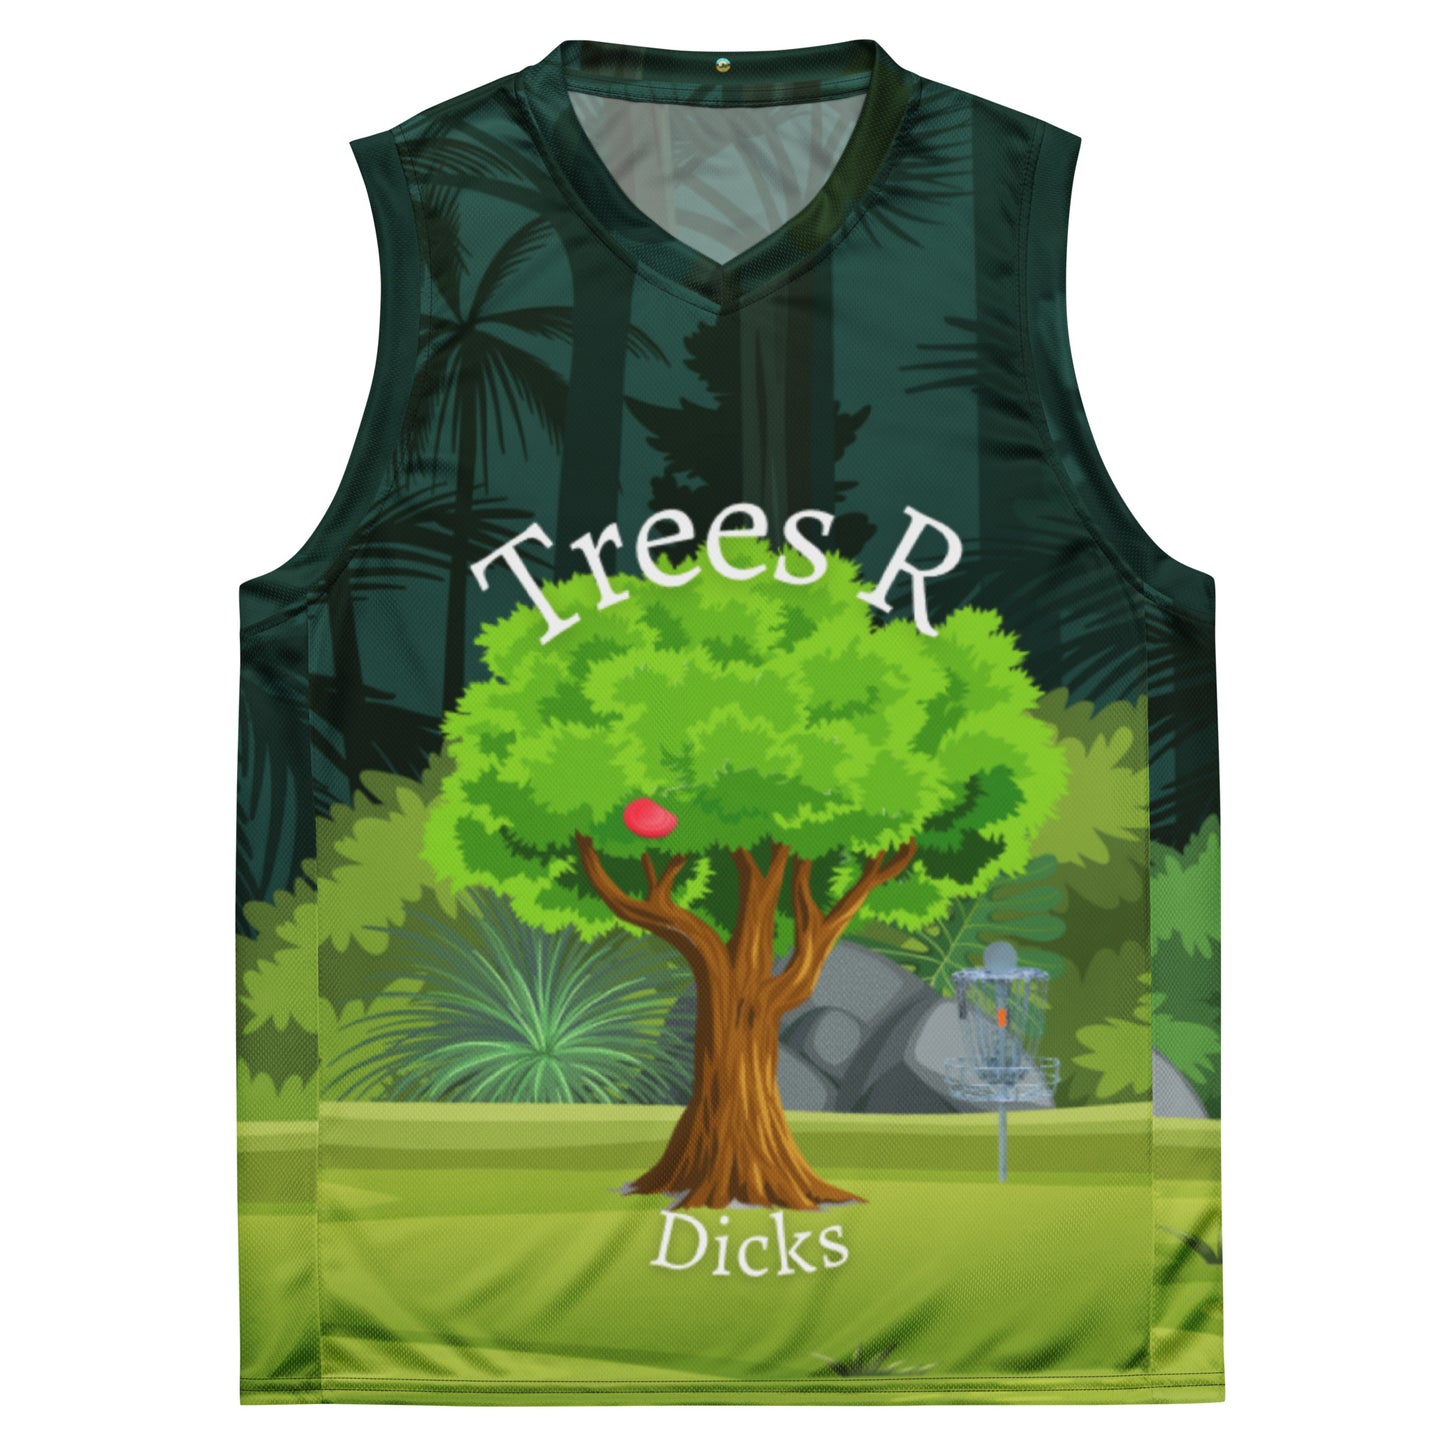 Tree's R Dicks Recycled unisex basketball jersey